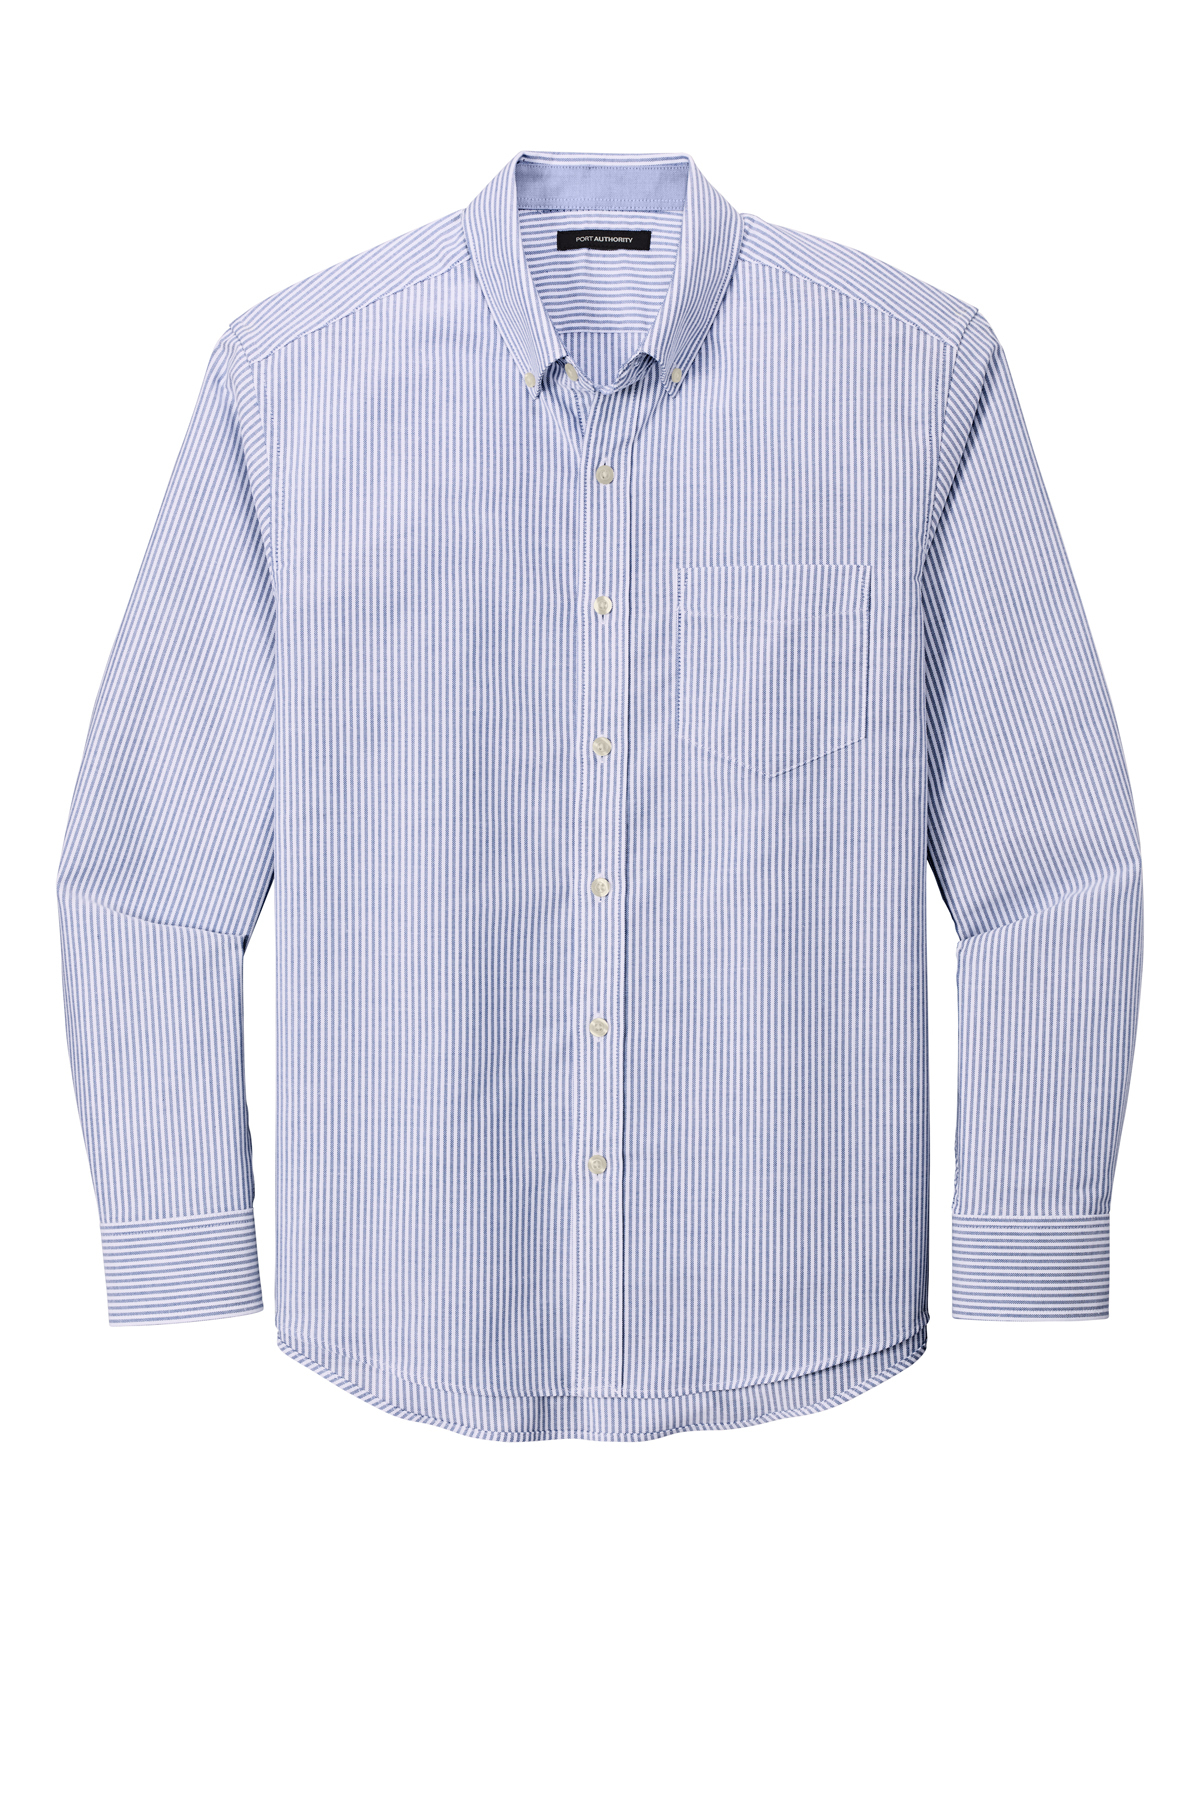 click to view Oxford Blue/ White